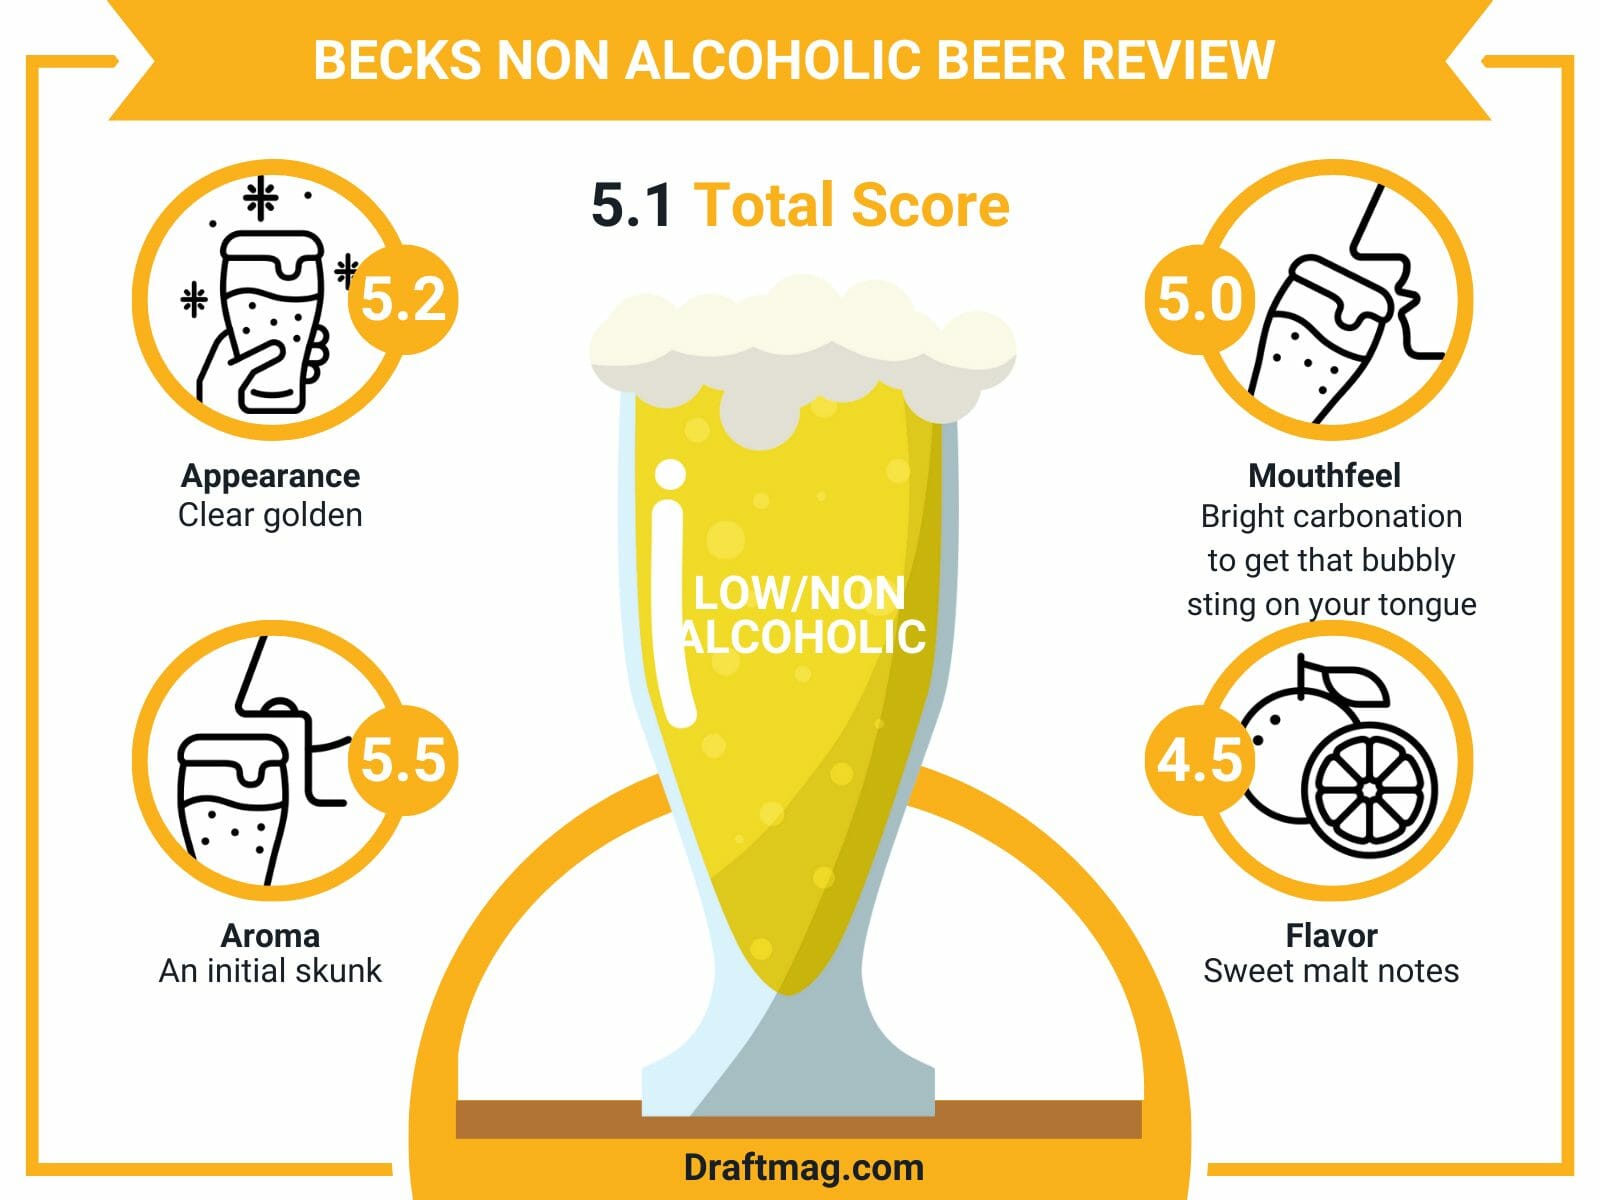 Becks non alcoholic beer review infographic